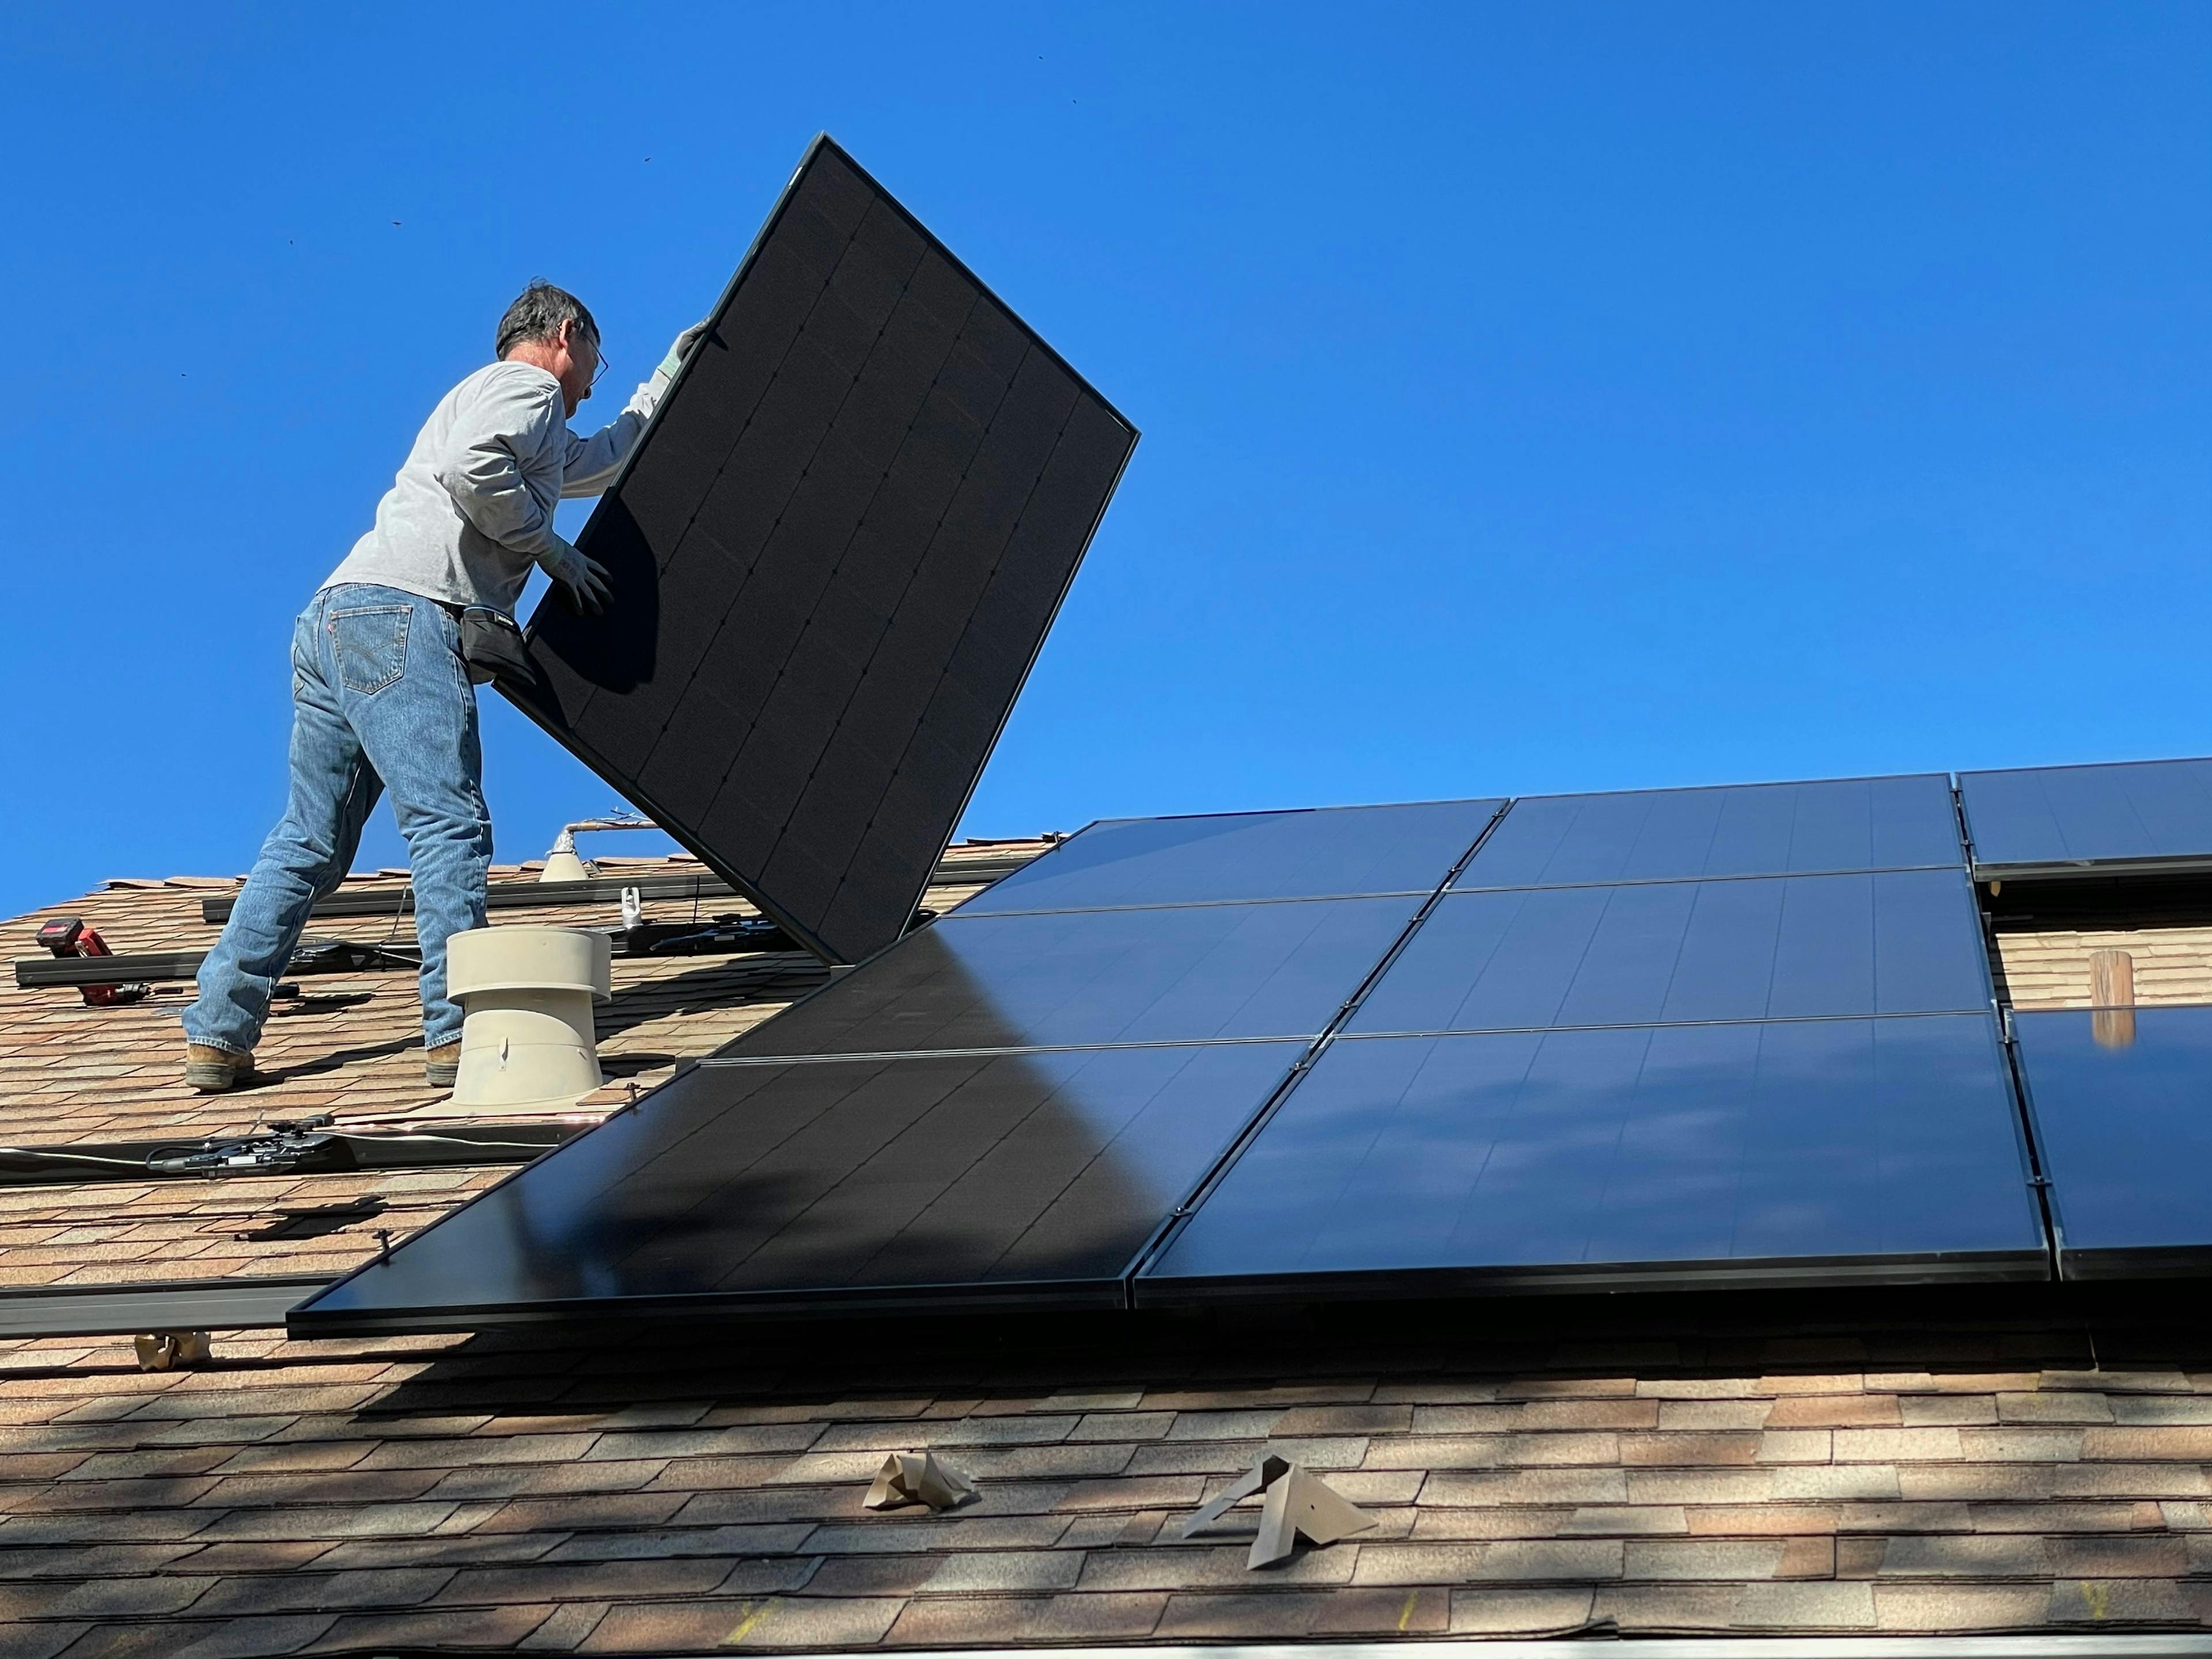 Switch to solar energy with rooftop photovoltaics